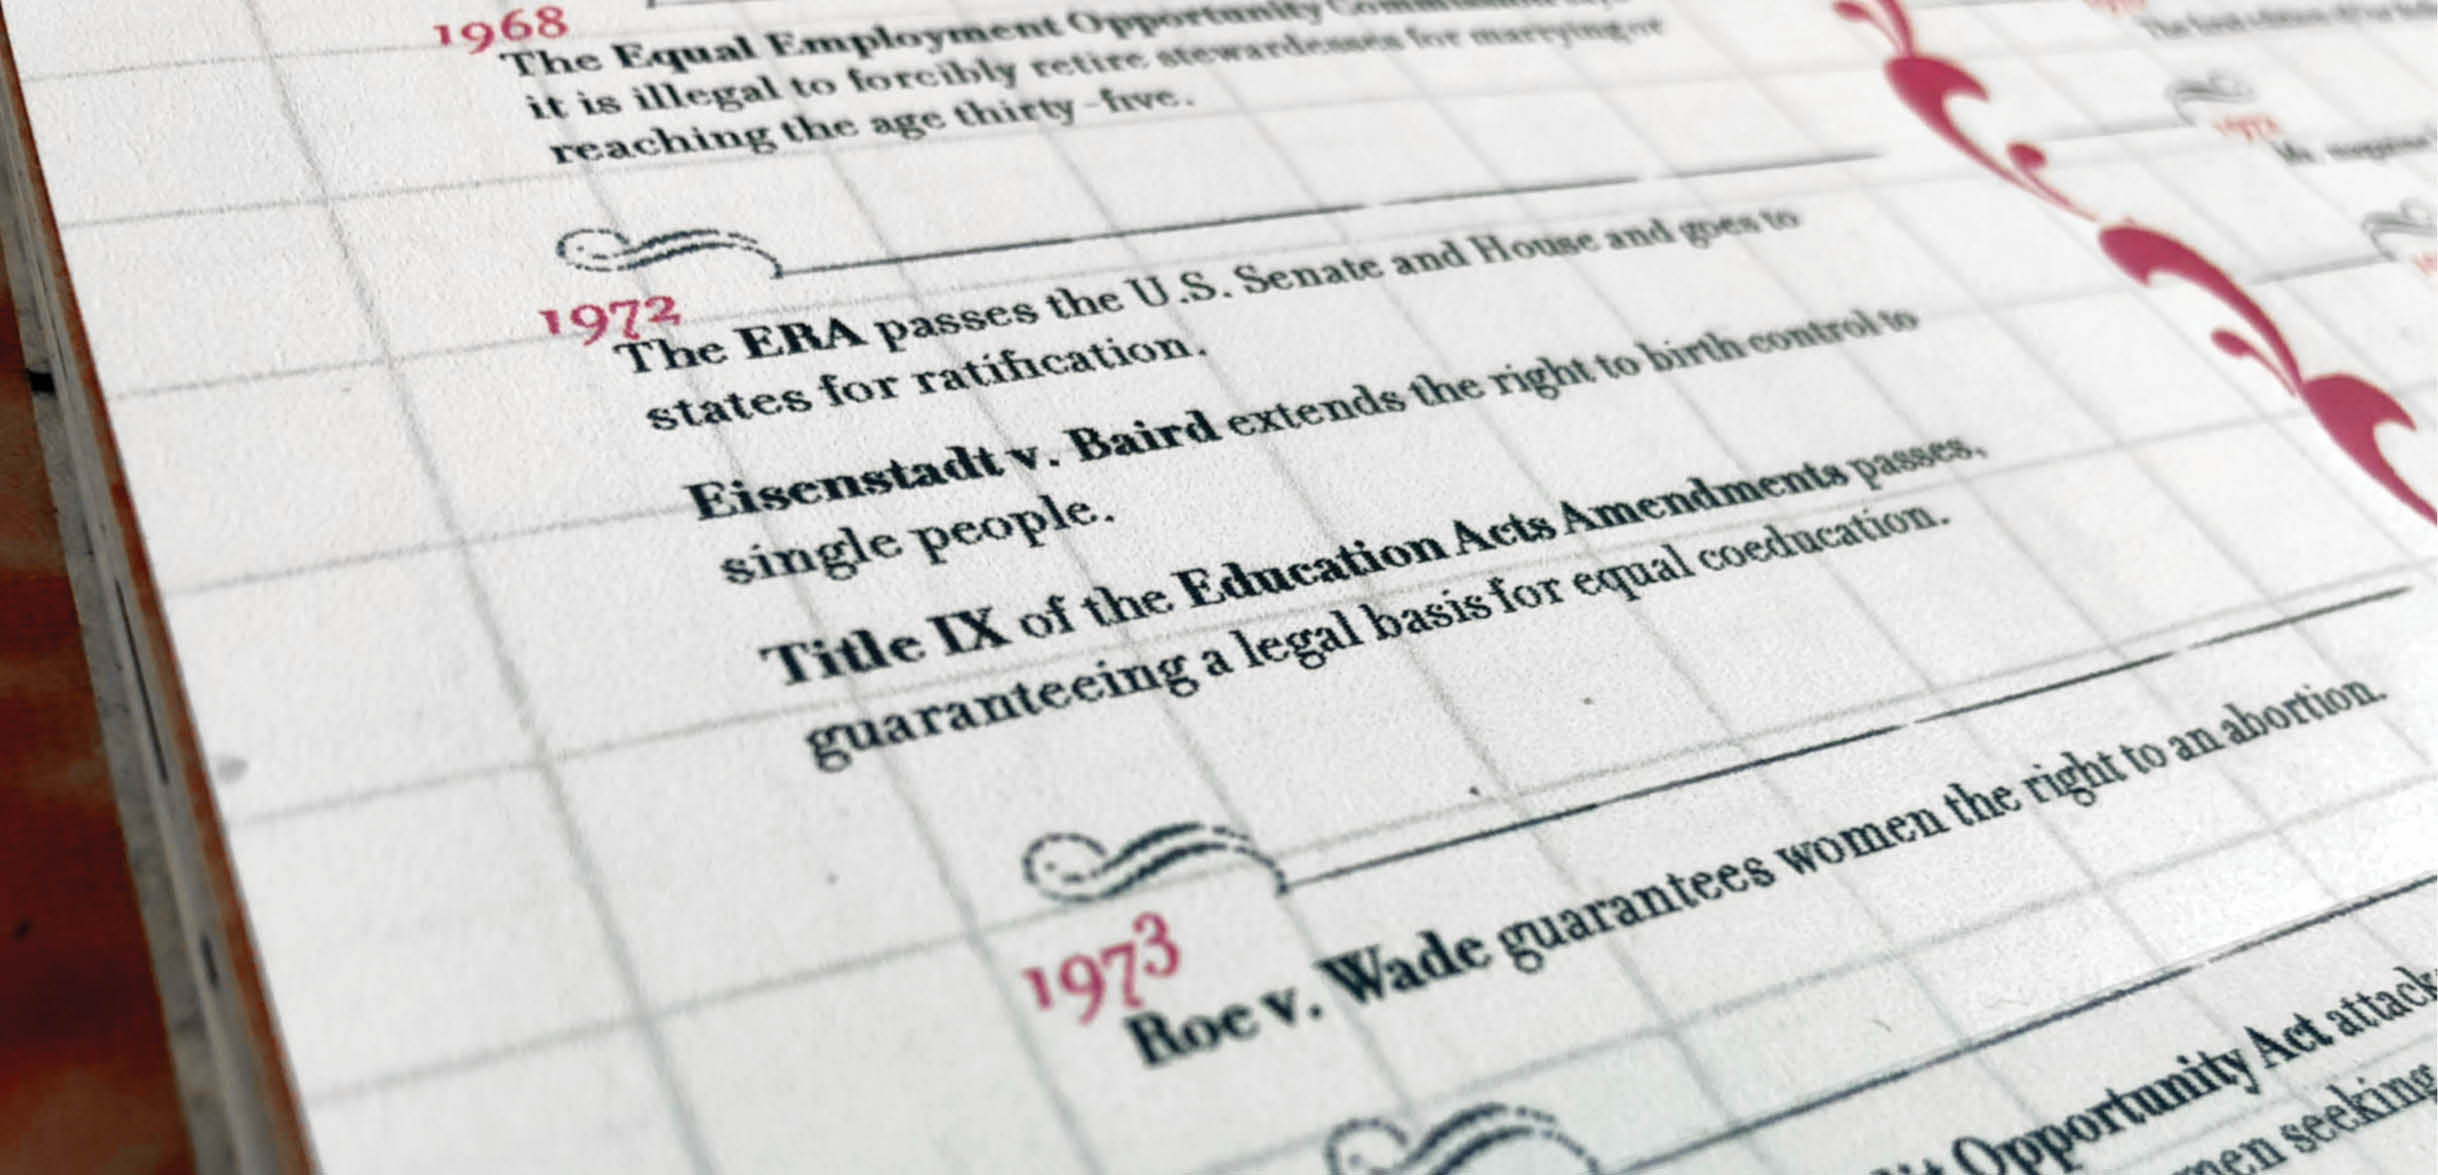 Close up of a page from the waves book, showing a timeline of rights gained and laws passed. 1972: ERA, Eisenstadt v. Baird, Title XI; 1973: Roe v Wade.